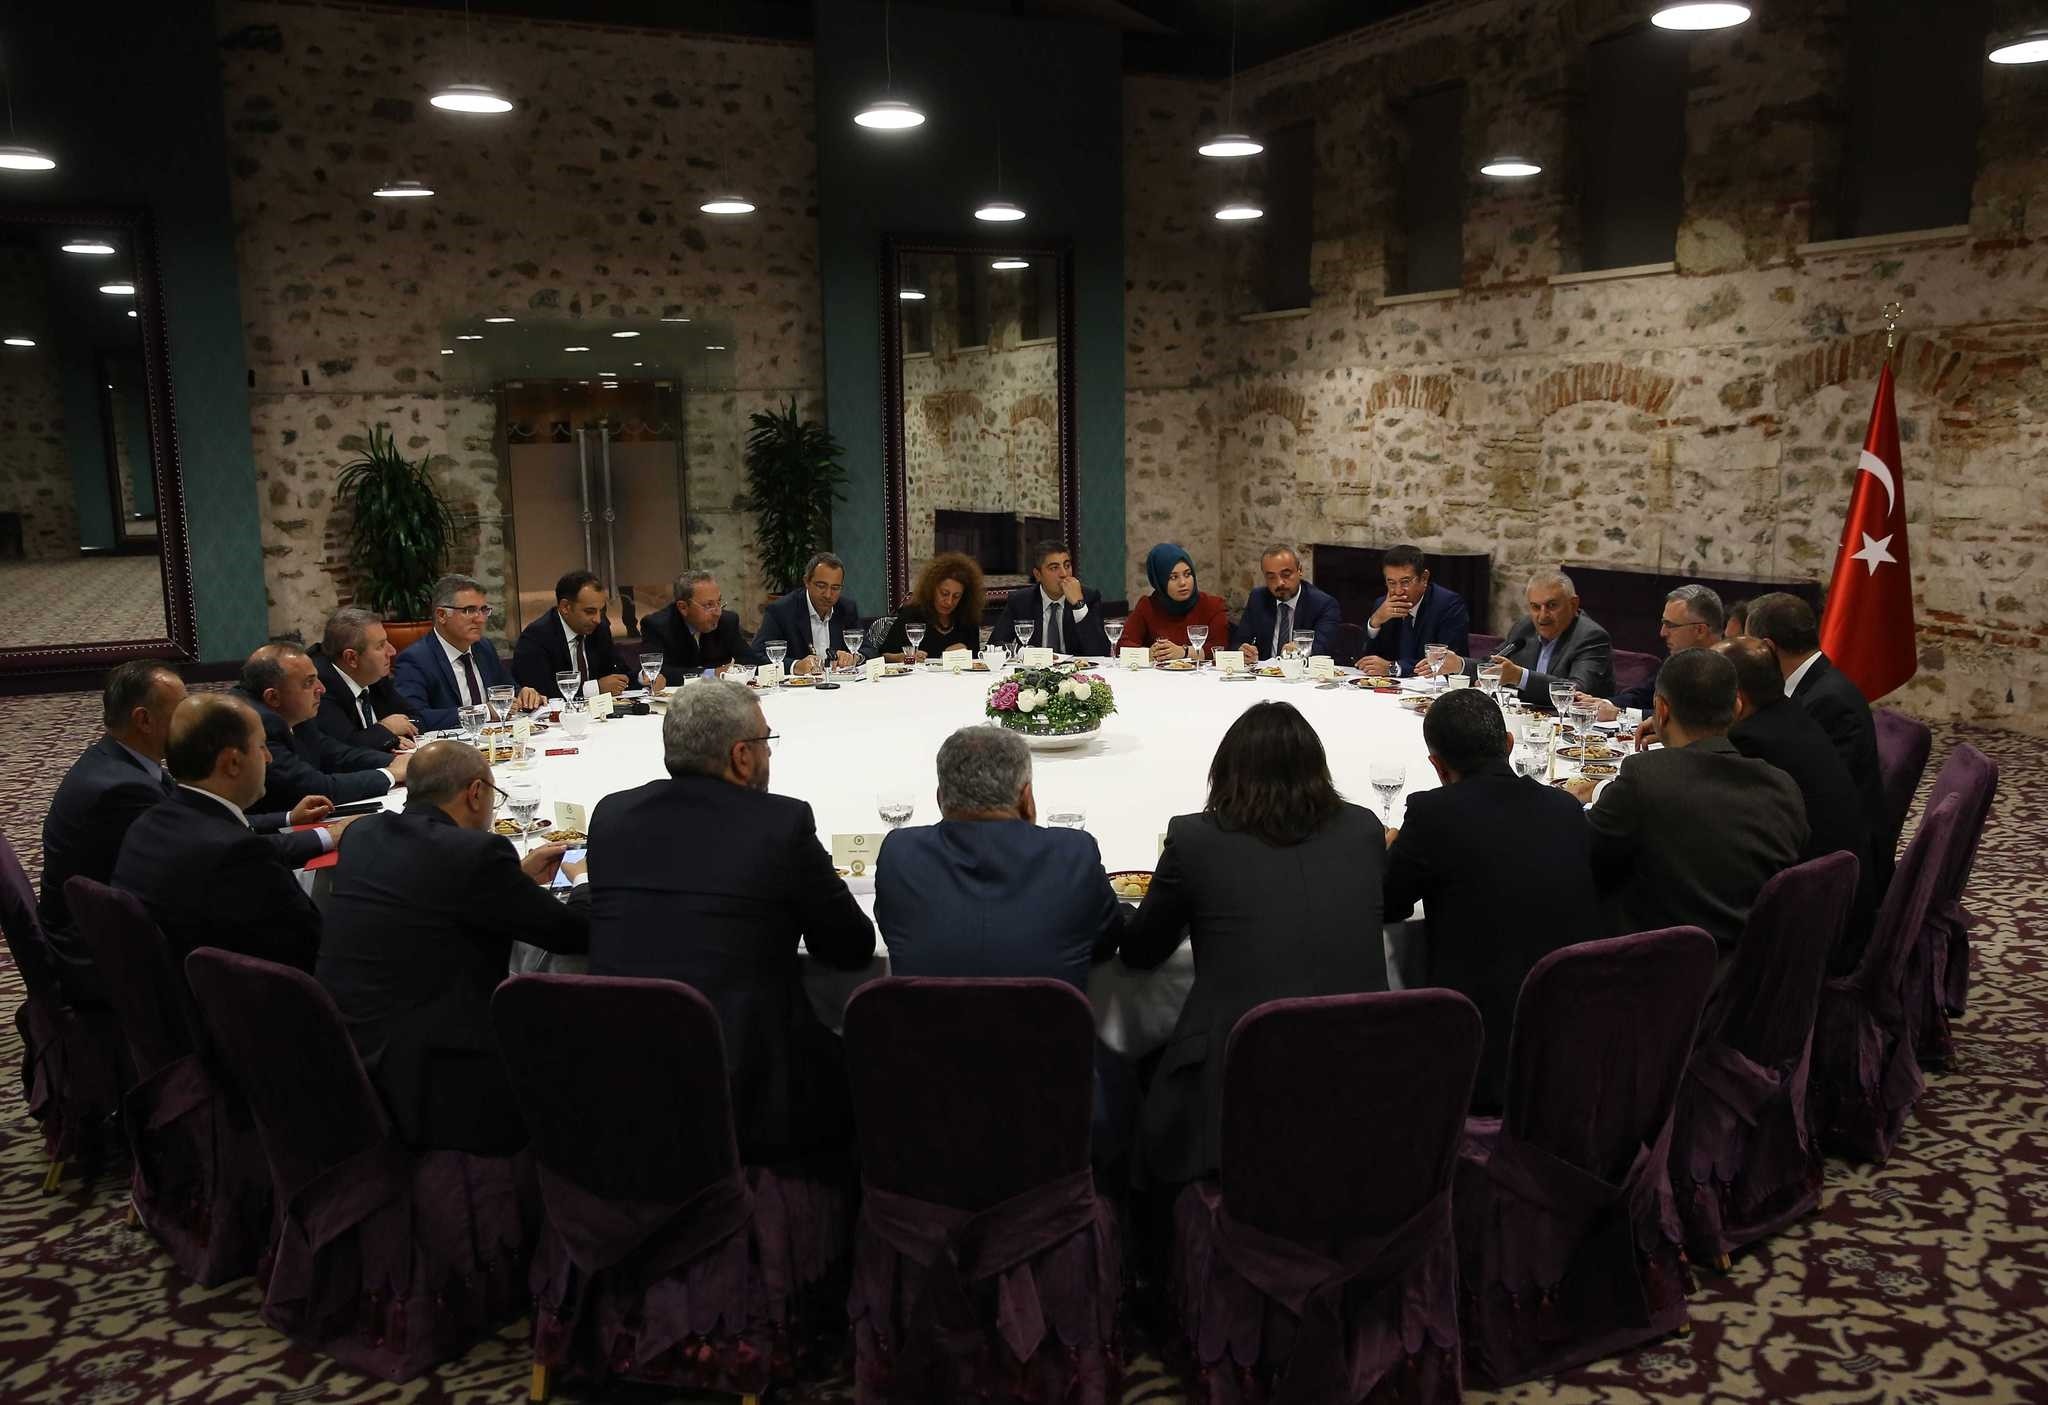 Prime Minister Binali Yu0131ldu0131ru0131m held a special meeting with economy editors of national newspaper at Dolmabahu00e7e Prime Ministry Office in Istanbul on Saturday.